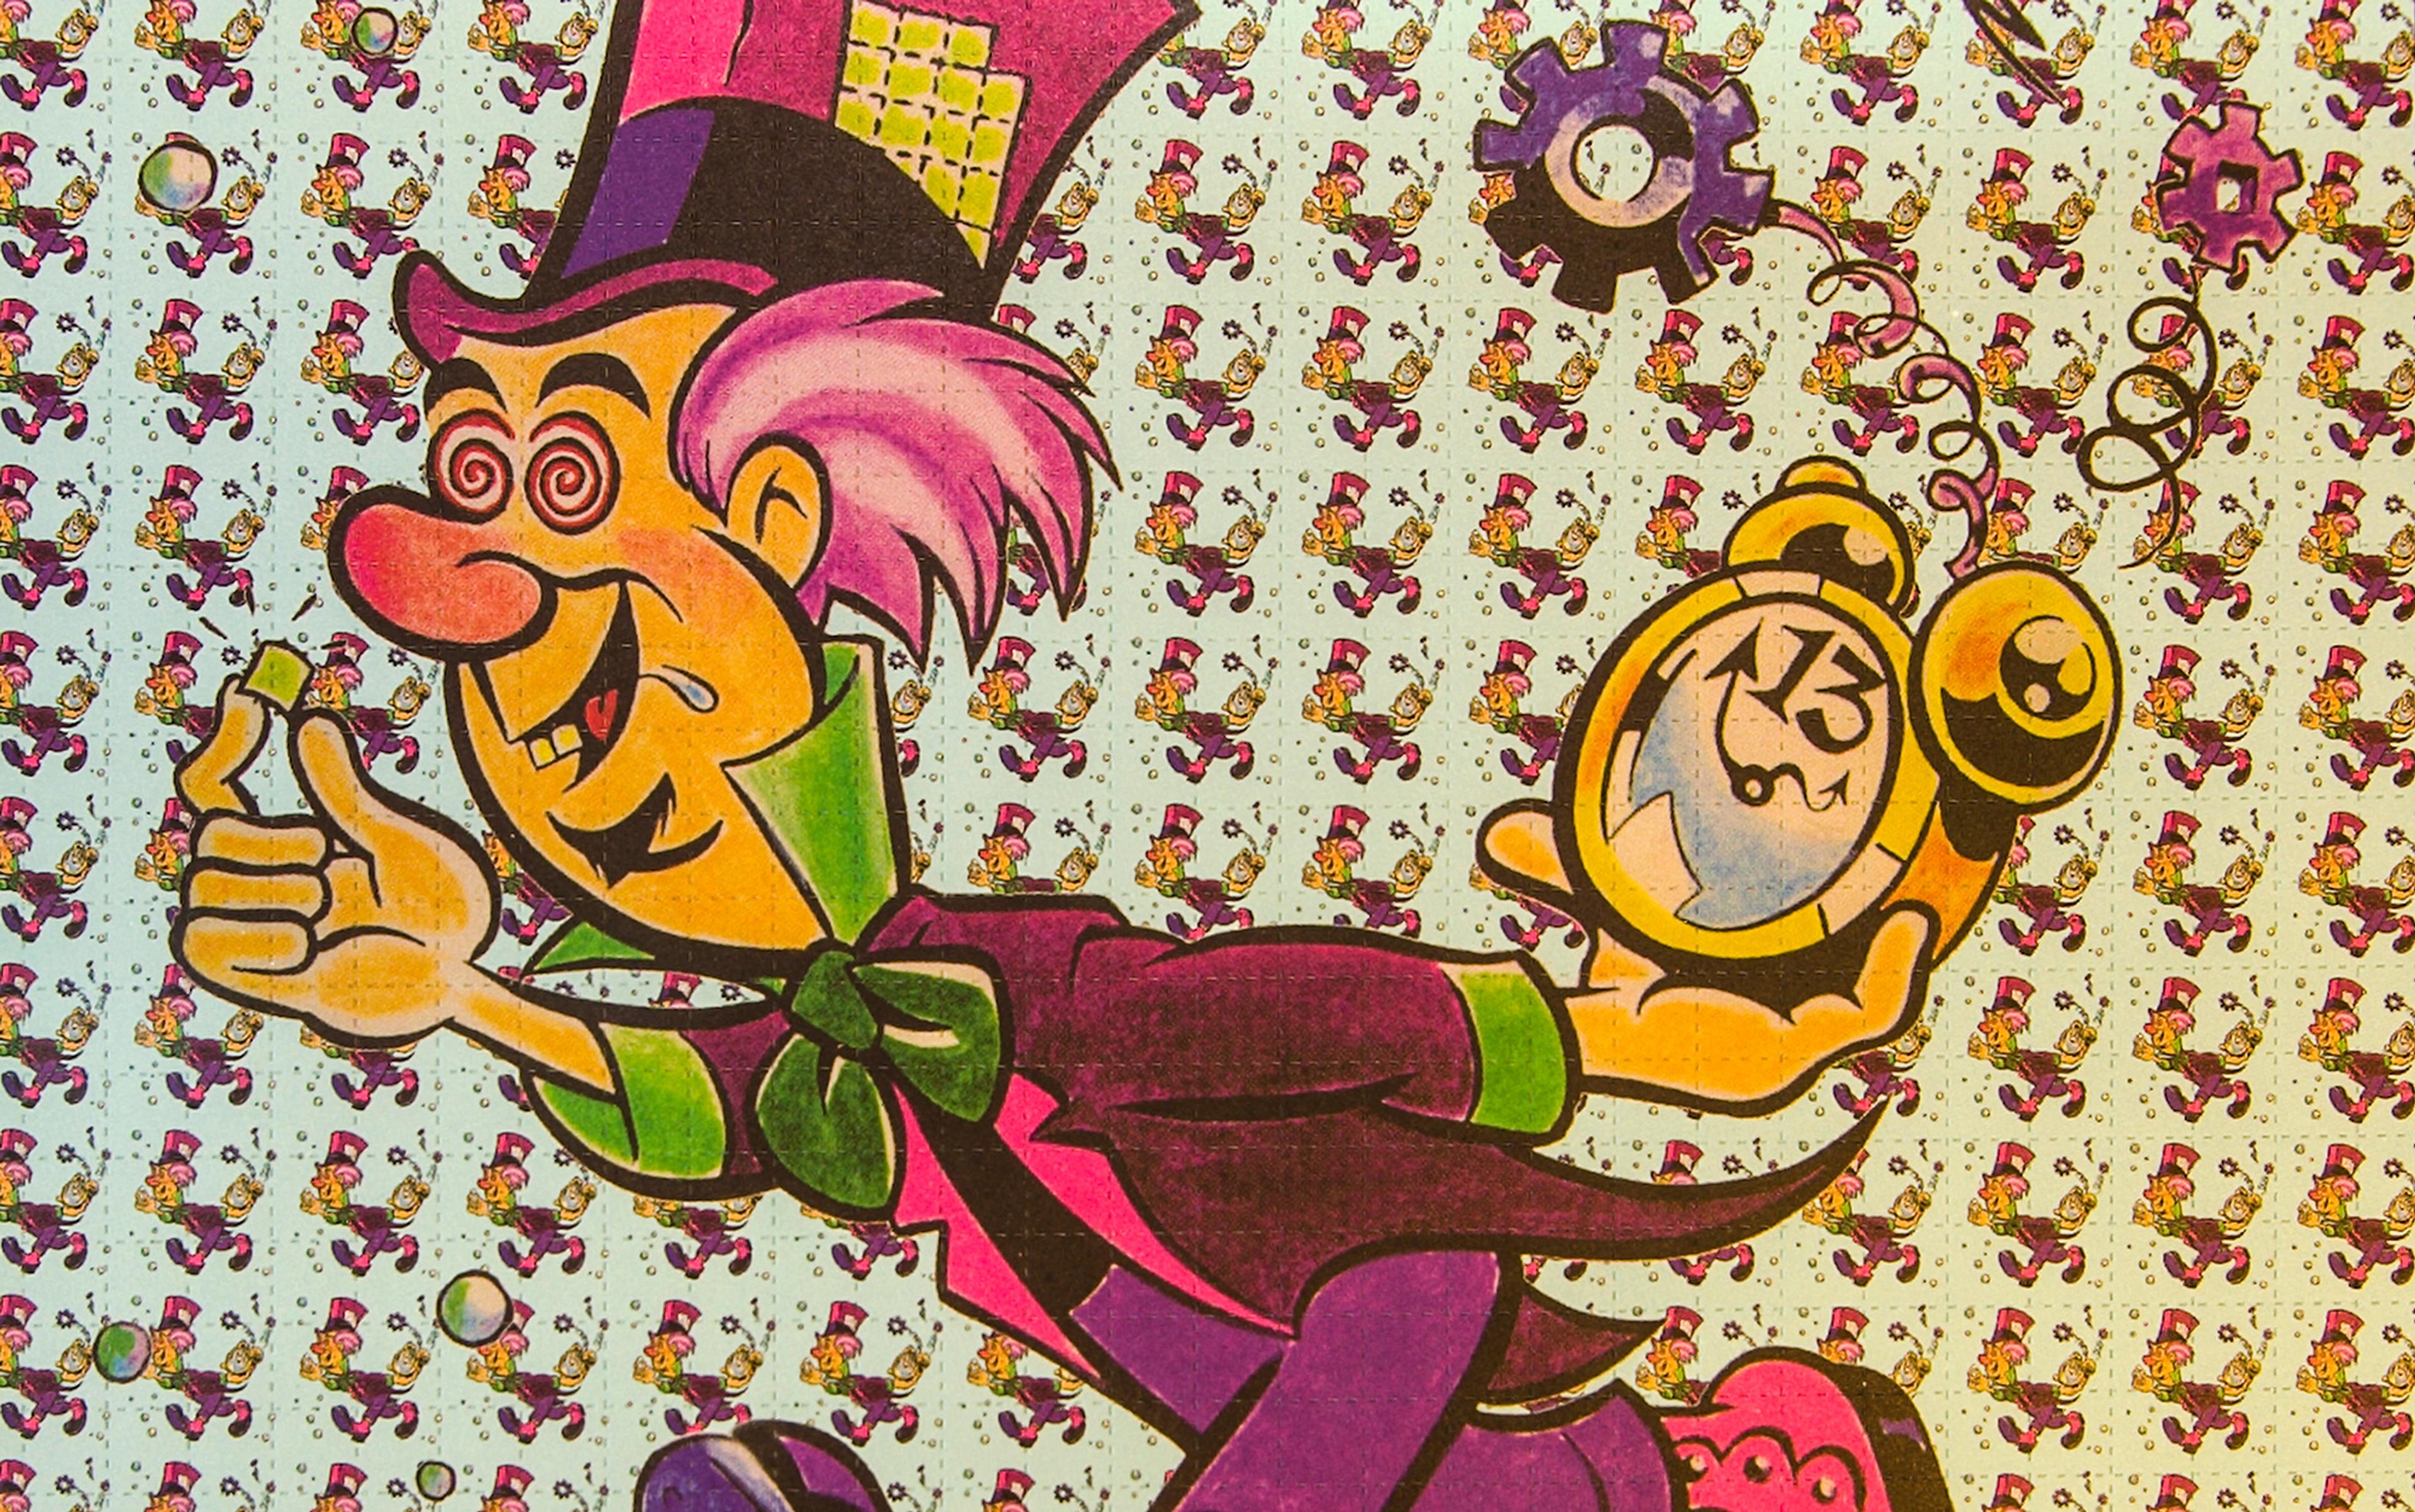 Colourful illustration of a whimsical character in a top hat and bow tie, holding a clock showing 13 o’clock. The background is filled with smaller images of the same character. The character’s eyes are spirals, and gears and bubbles are also present in the image.